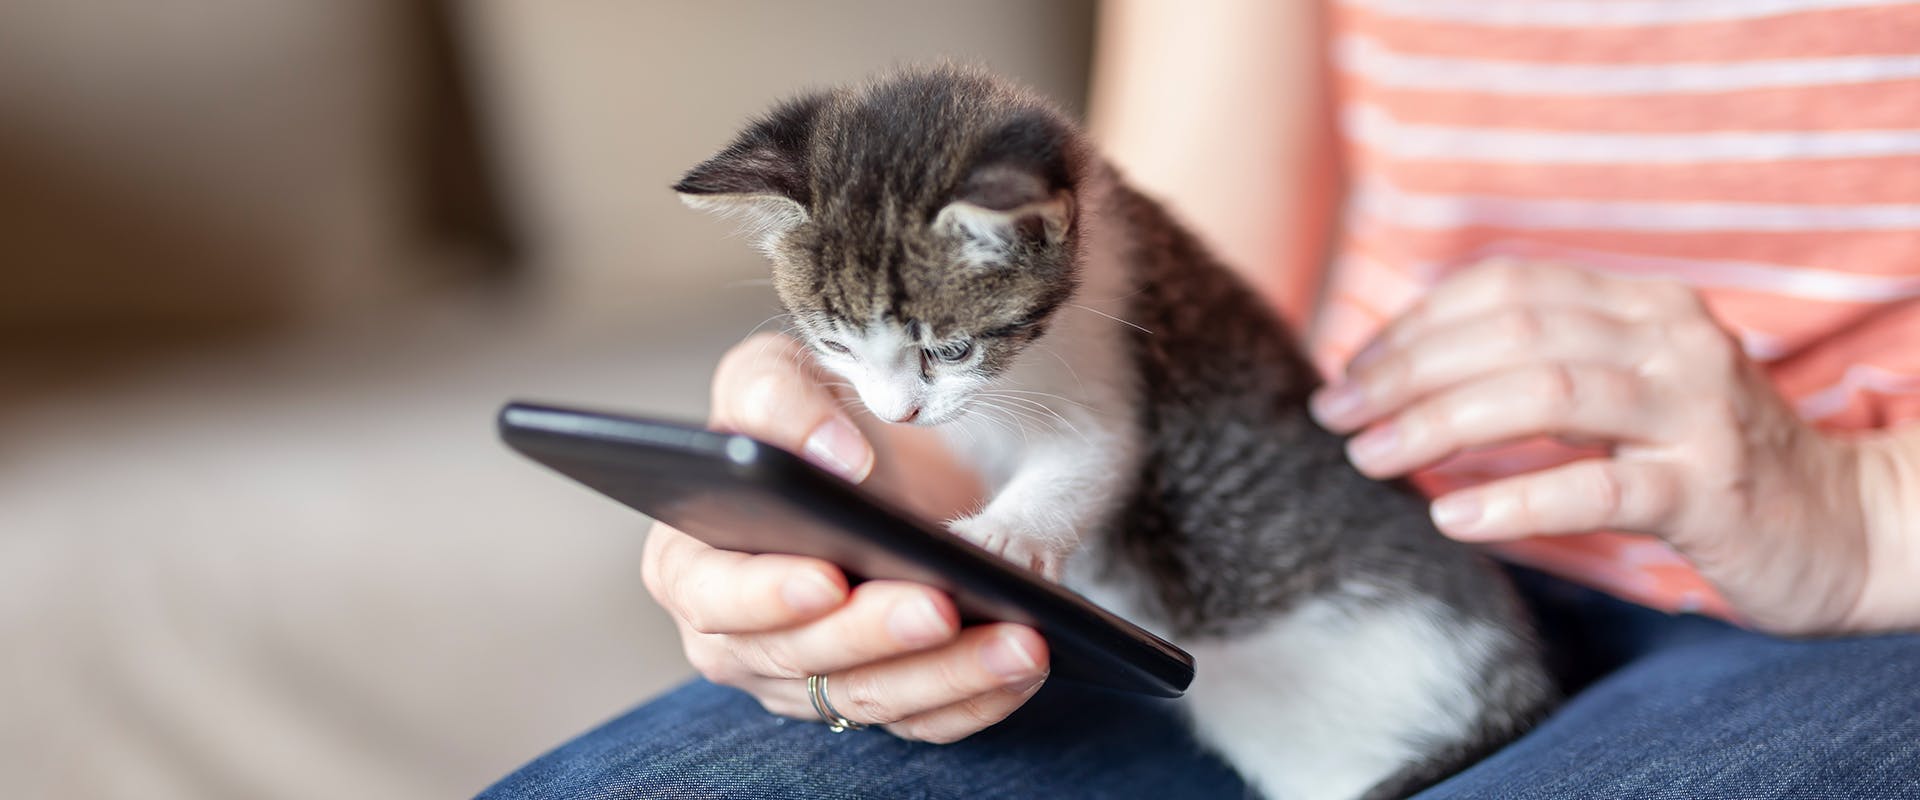 A young kitten sitting on their owner's lap, looking and pawing at a phone screen